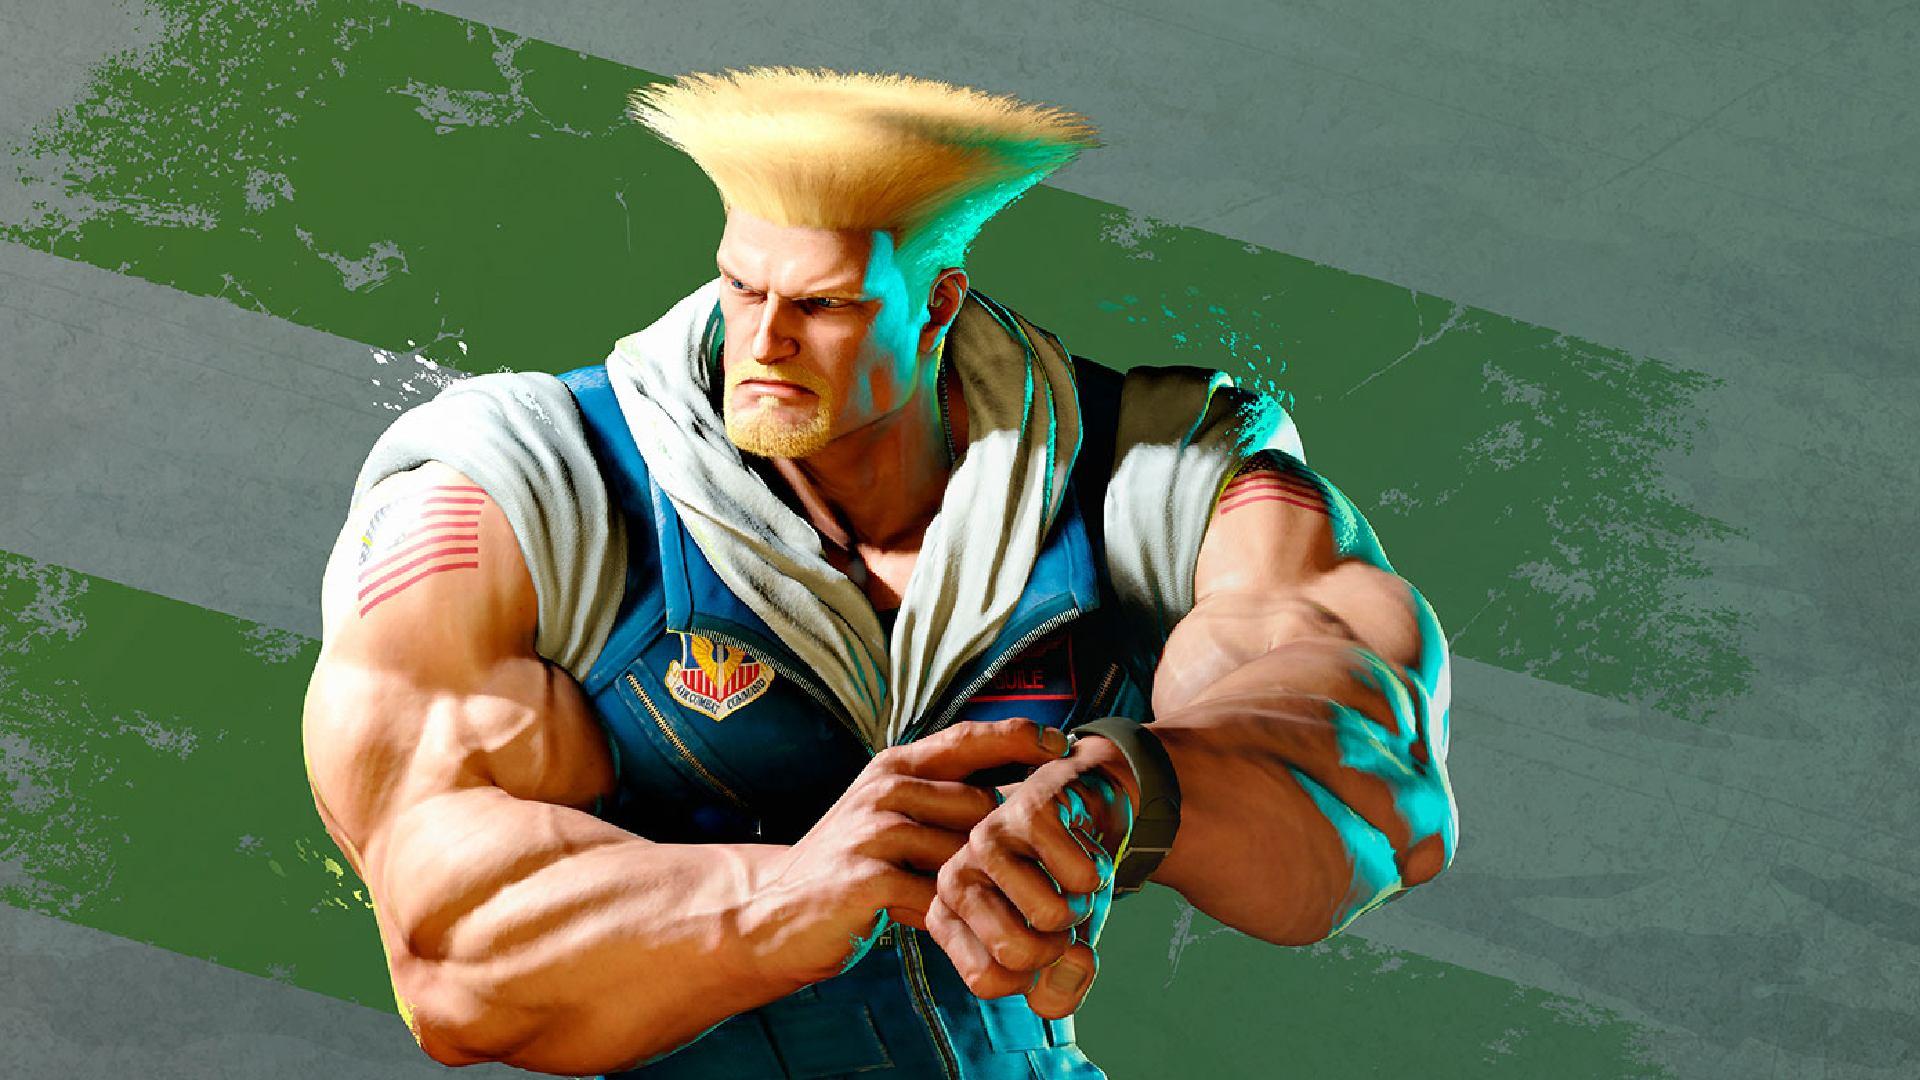 CHARACTER MODEL  Street fighter art, Street fighter characters